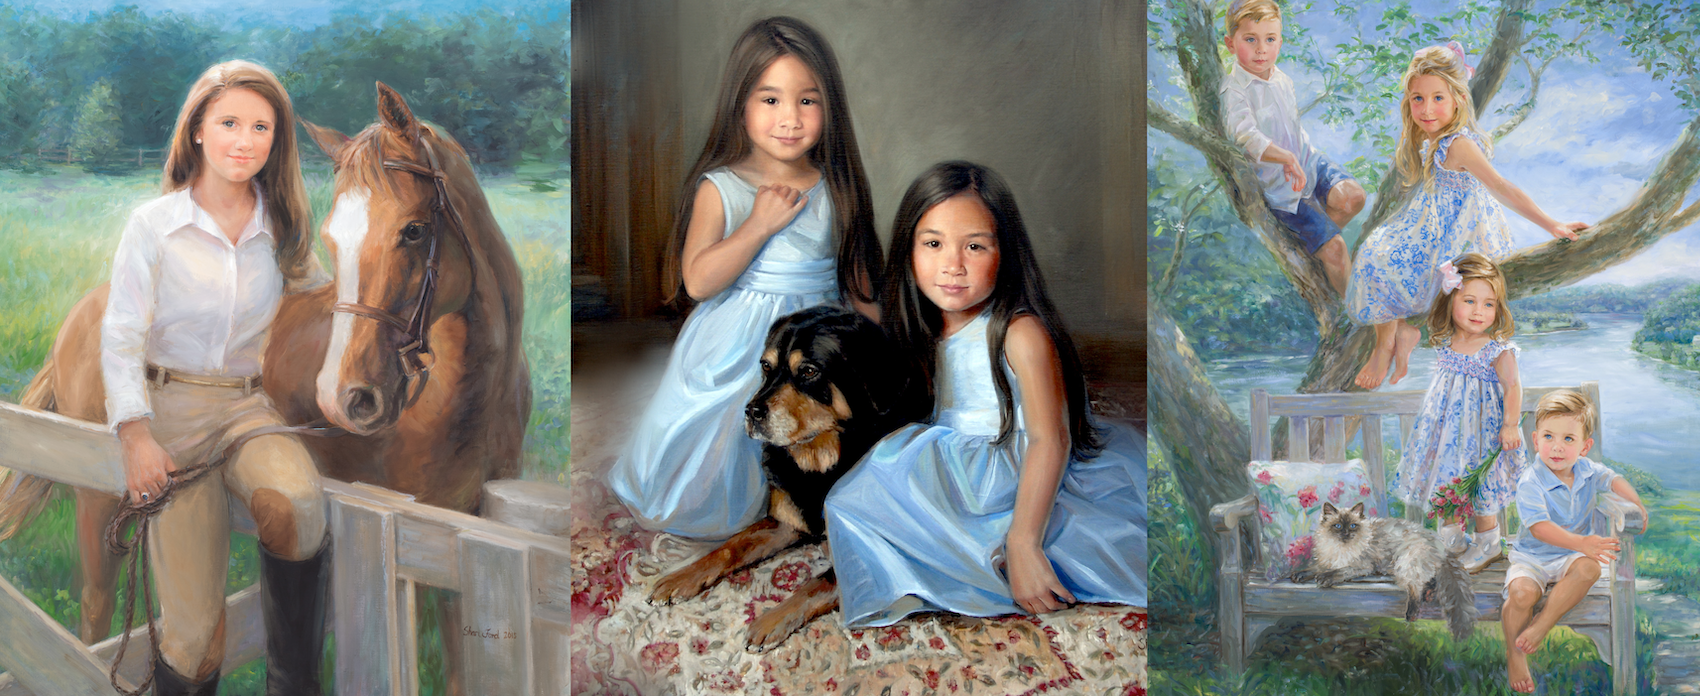 Children and pet animal heirloom Commissioned Oil Portraits on Linen